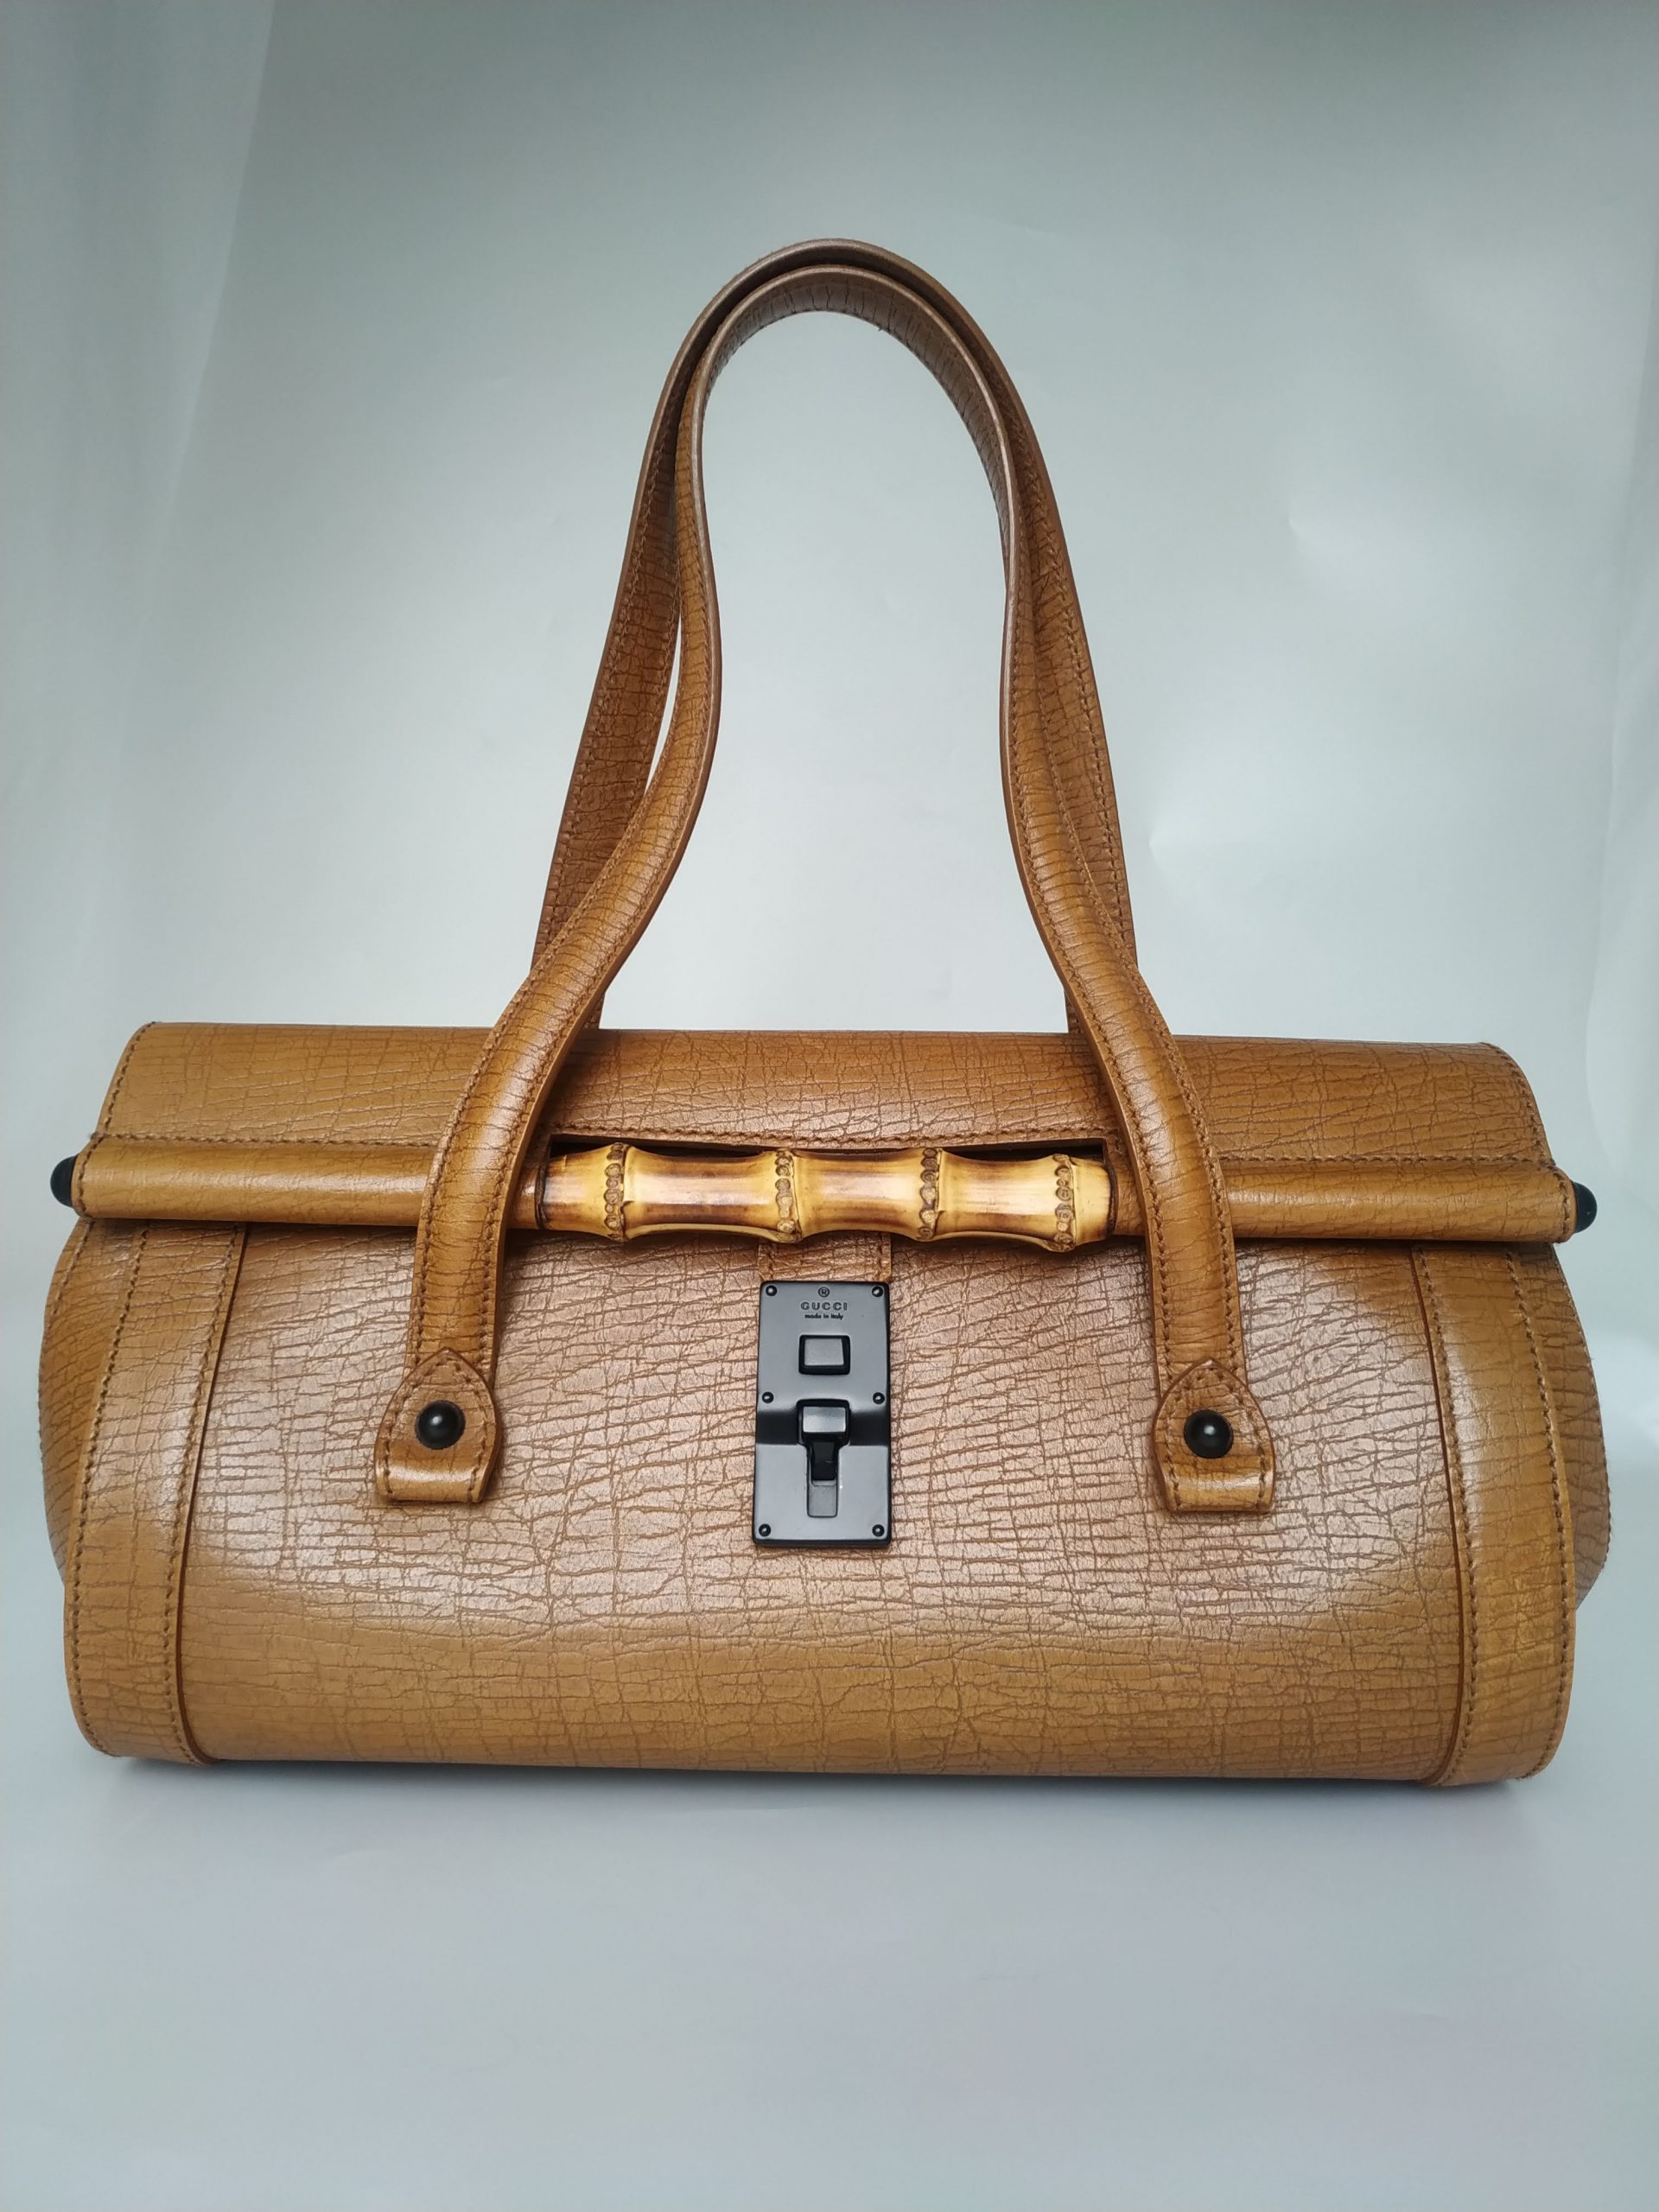 Gucci Bamboo Bullet Tom Ford Bag - Earth Luxury